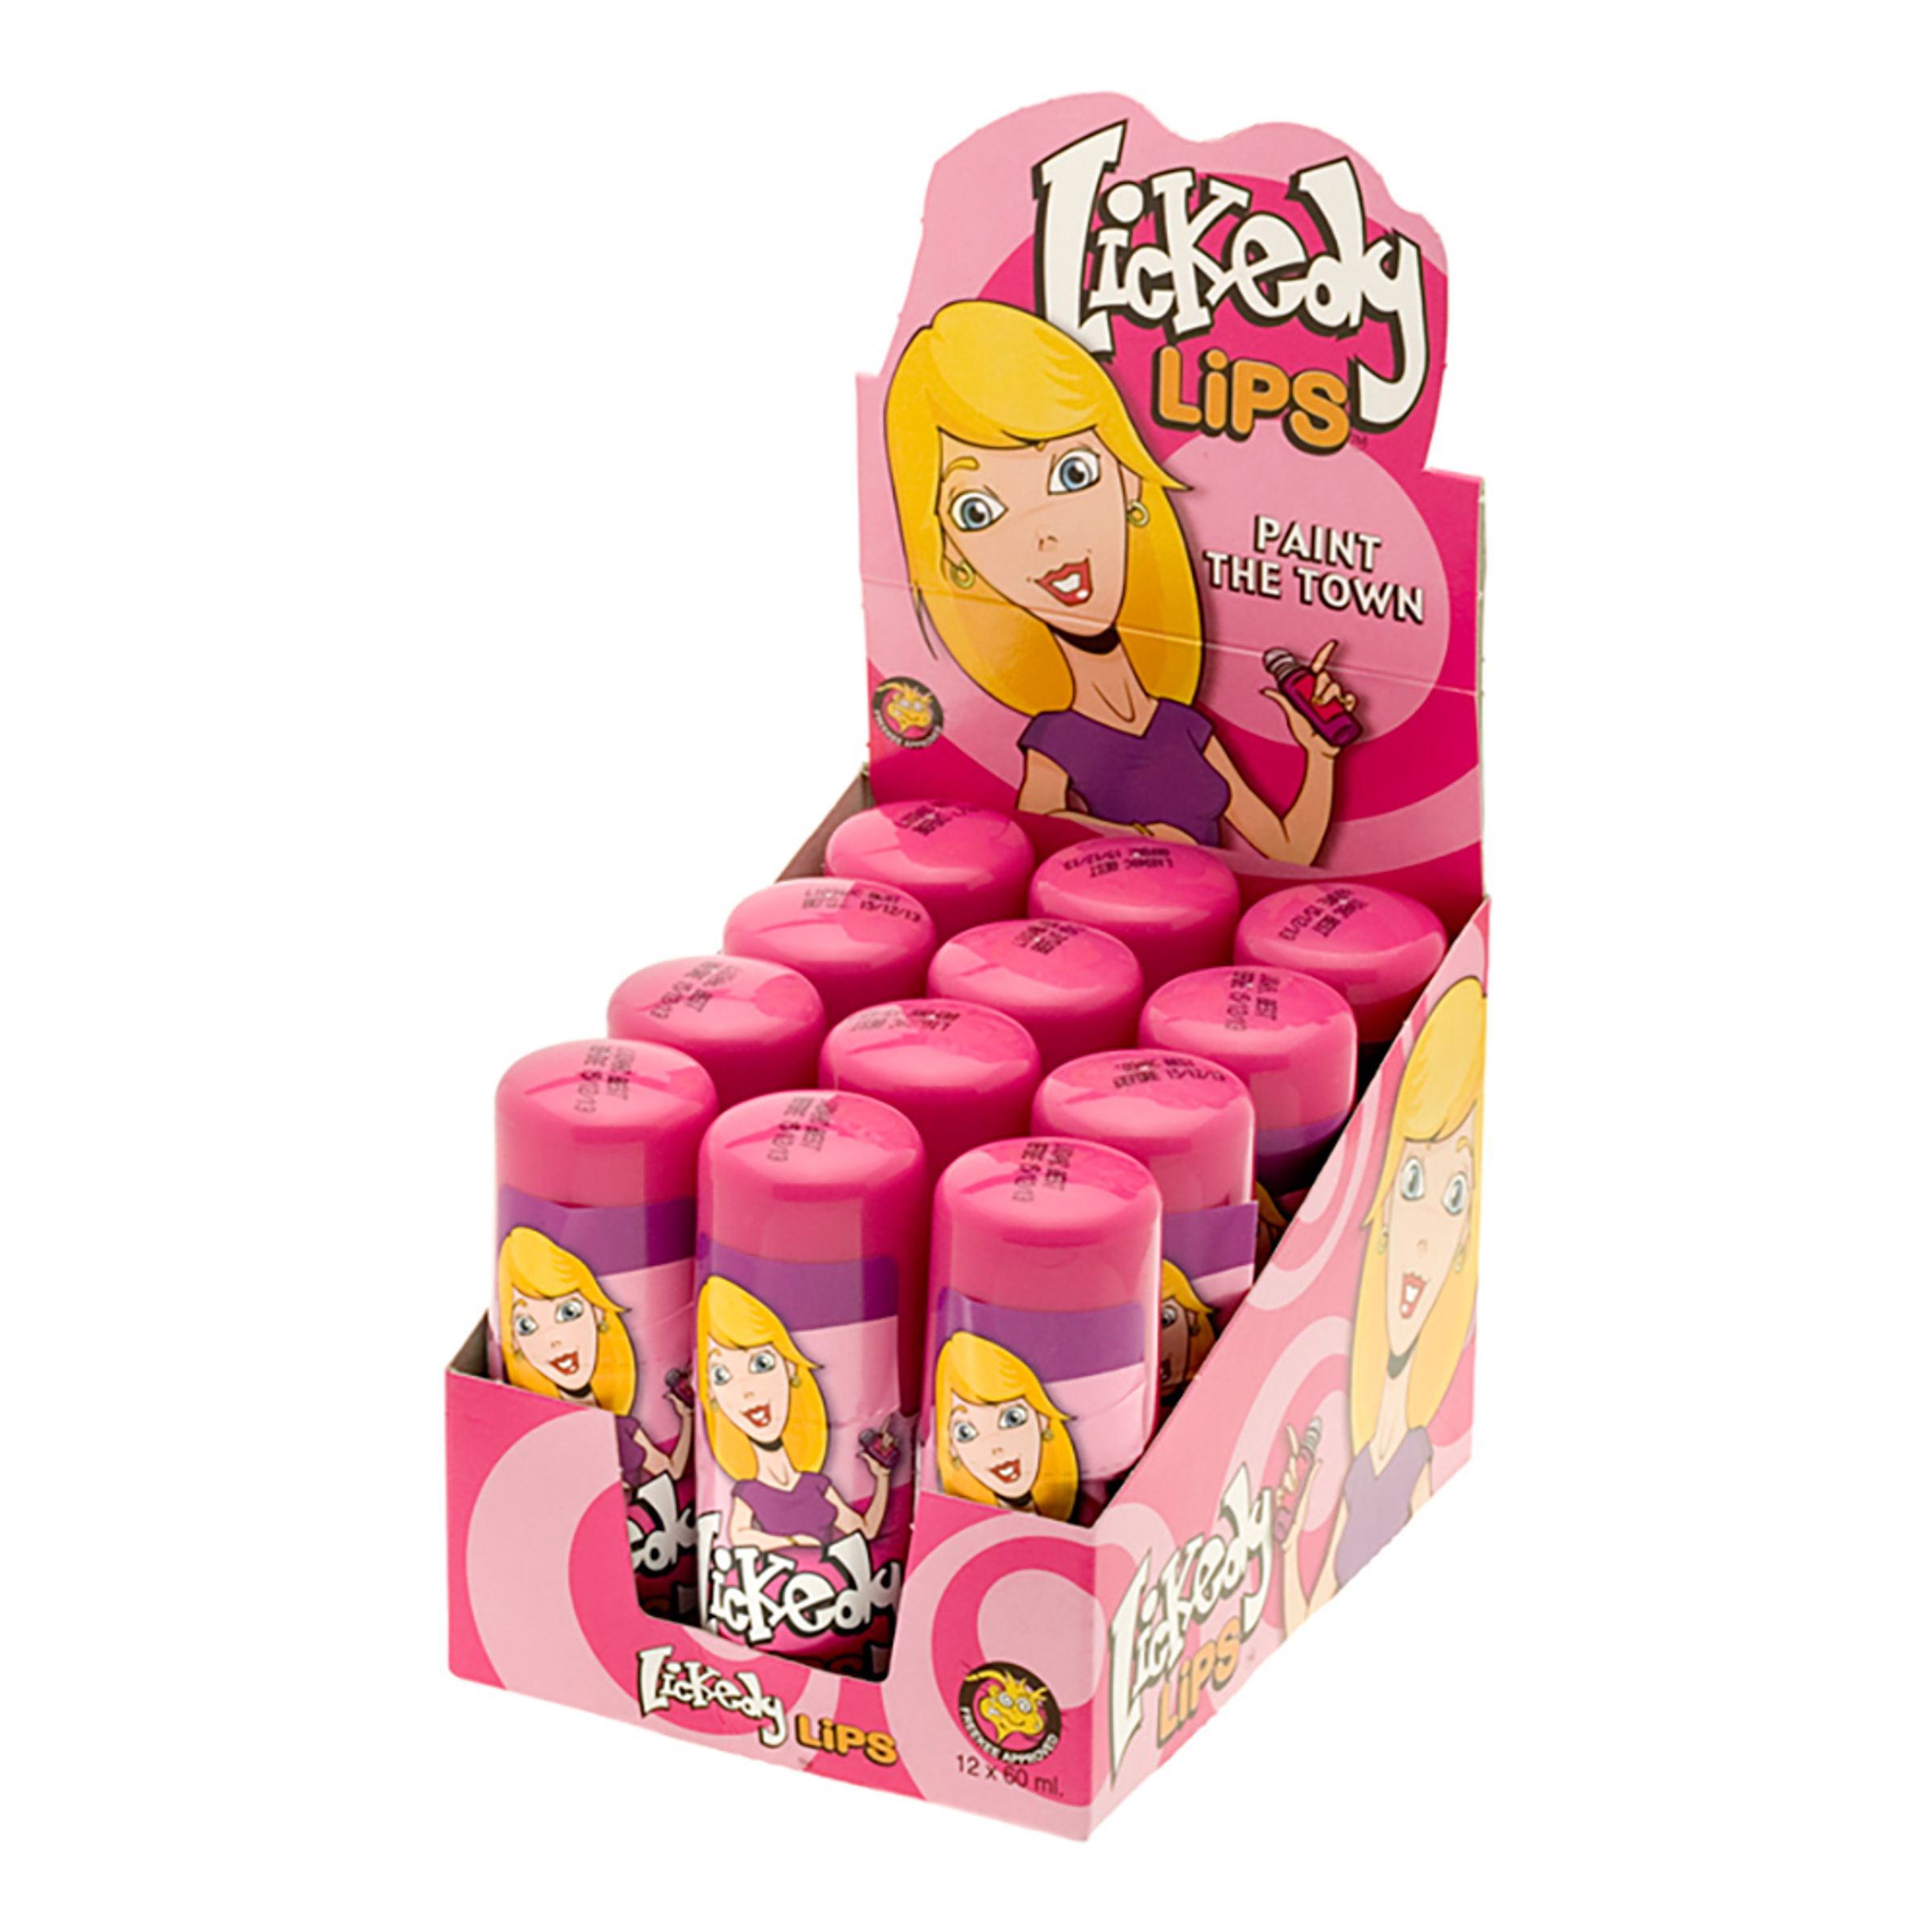 Lickedy Lips - 12-pack